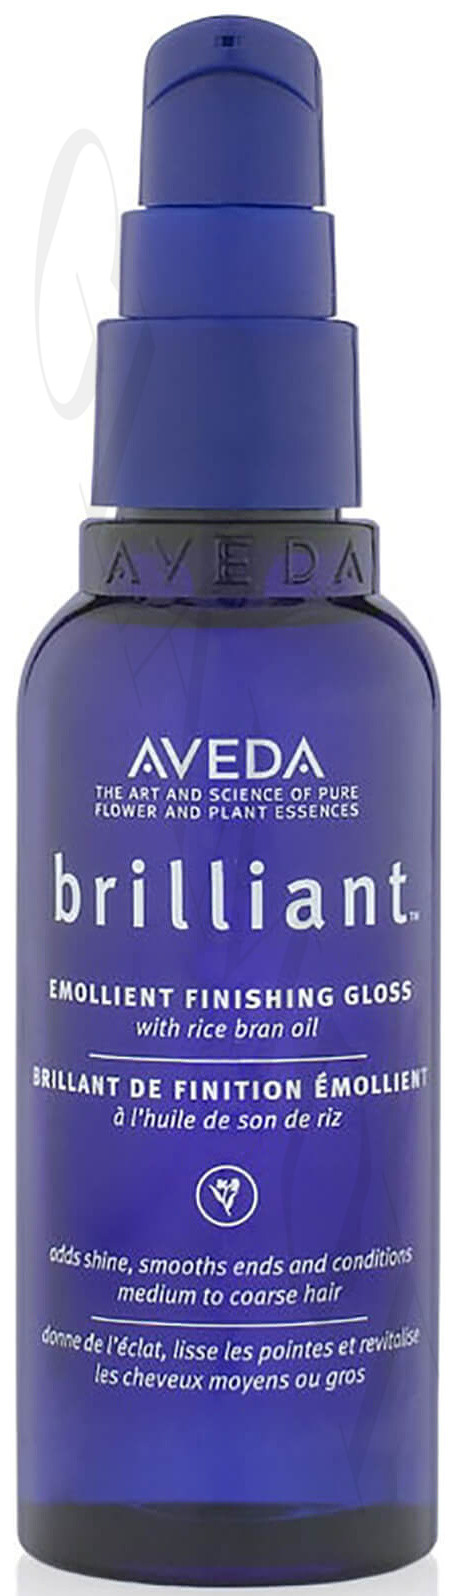 Aveda Brilliant Emollient Finishing Gloss 2.5 oz.~ DISCONTINUED ~ 💯  Authentic!